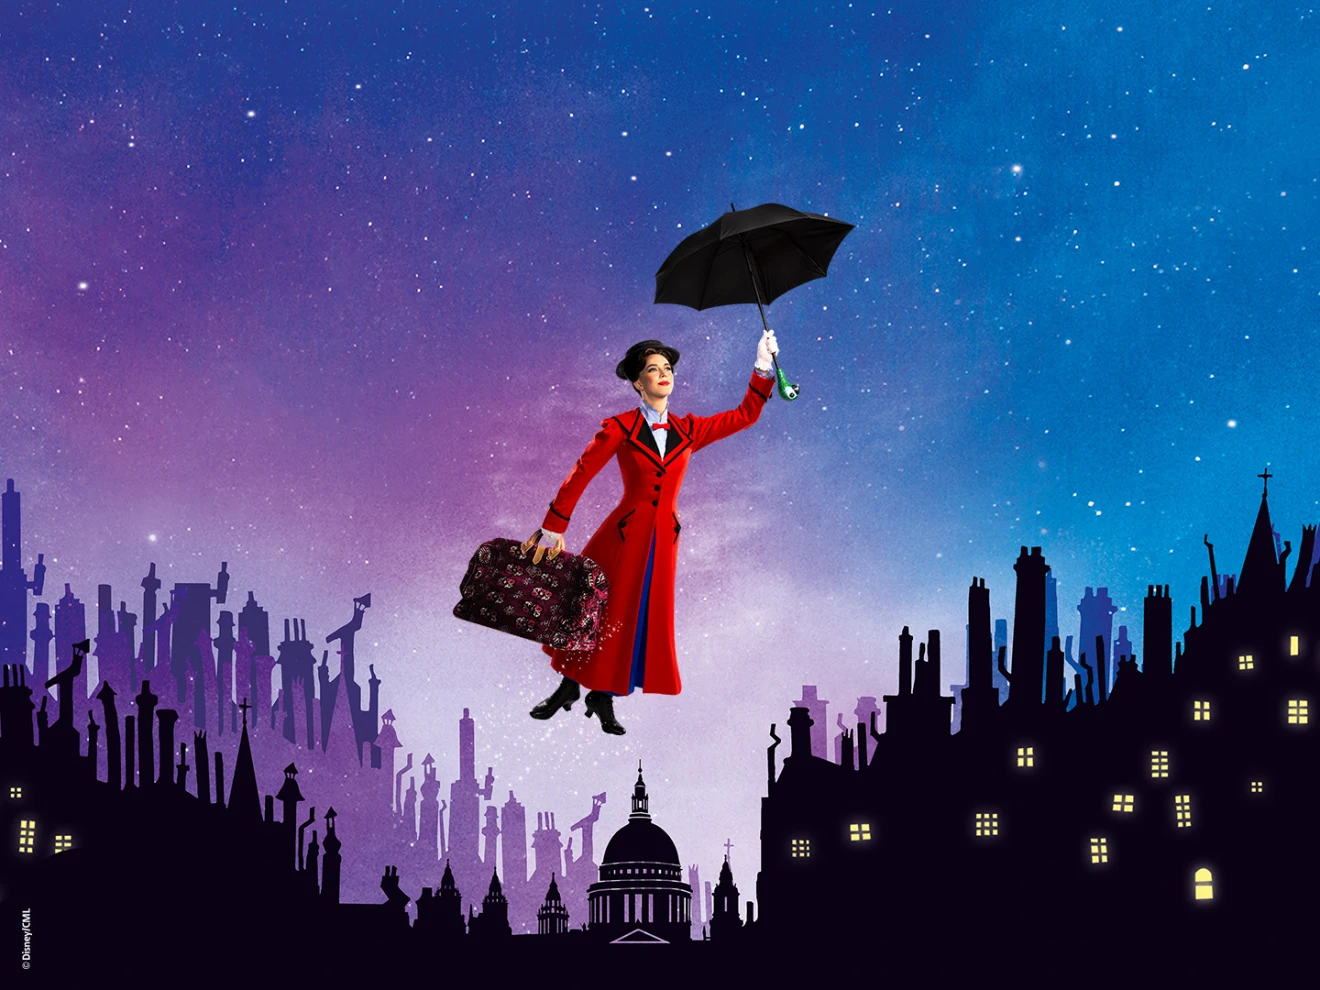 MARY POPPINS at the Lyric Theatre, QPAC